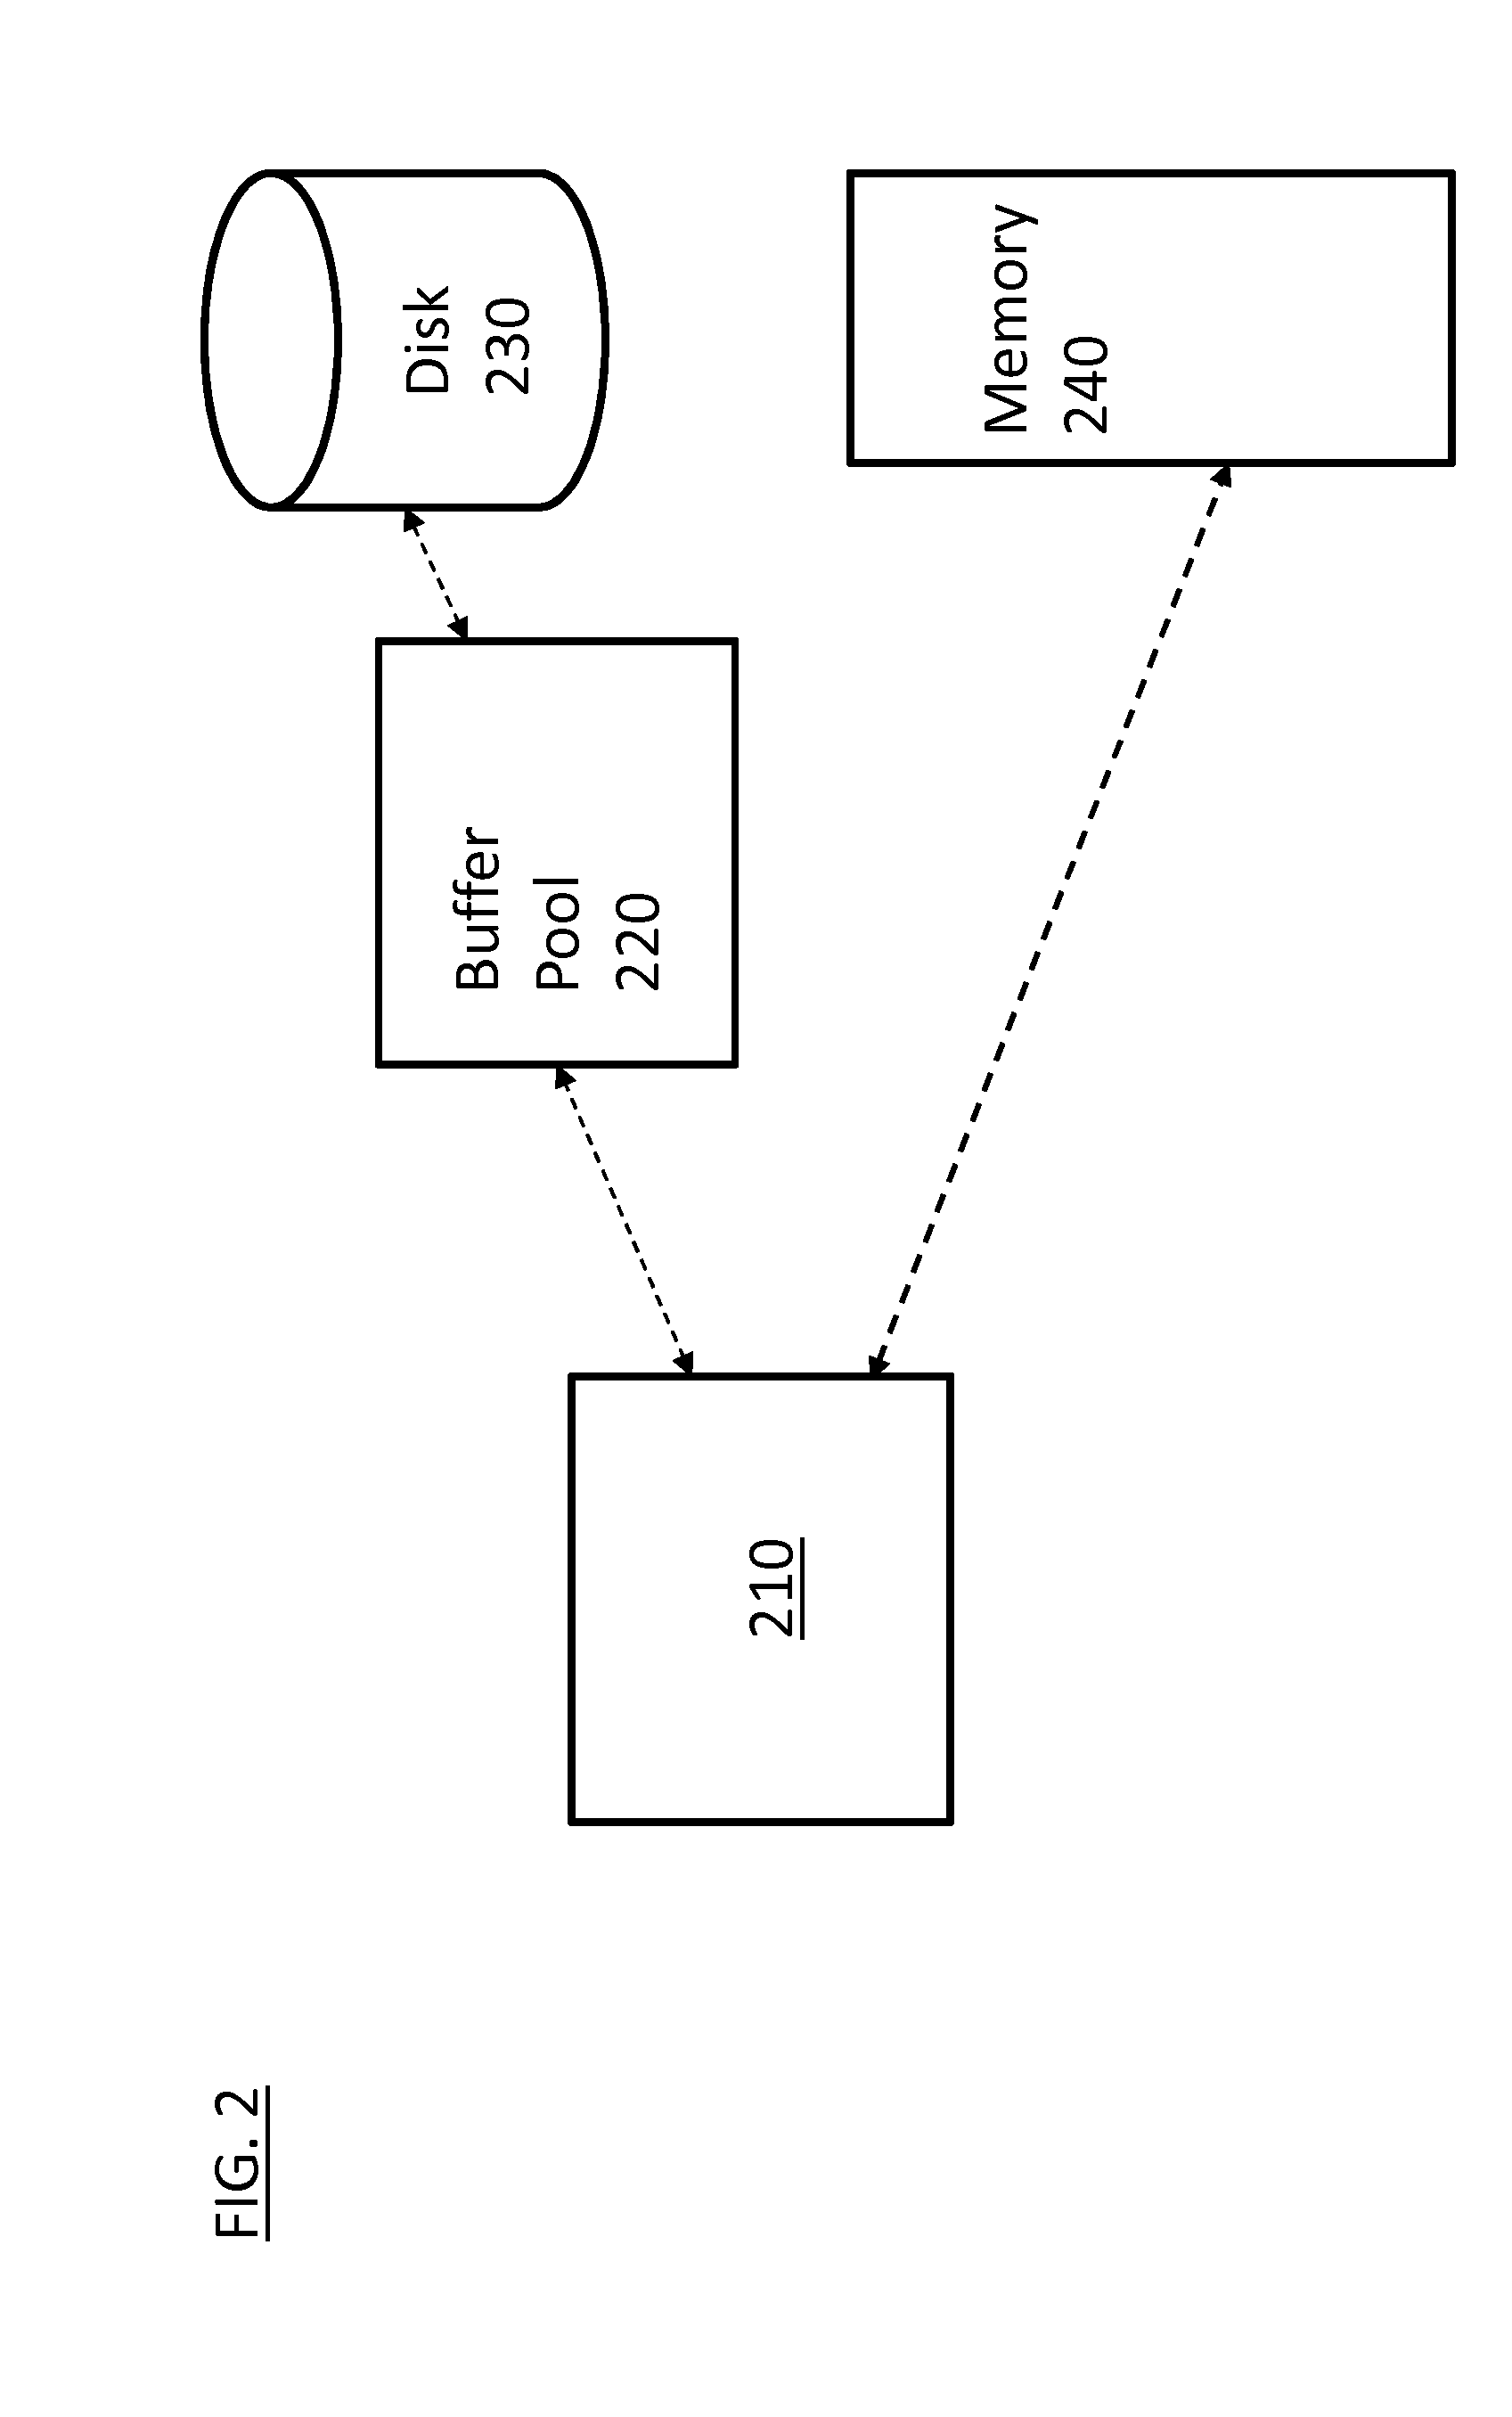 Hybrid table implementation by using buffer pool as permanent in-memory storage for memory-resident data